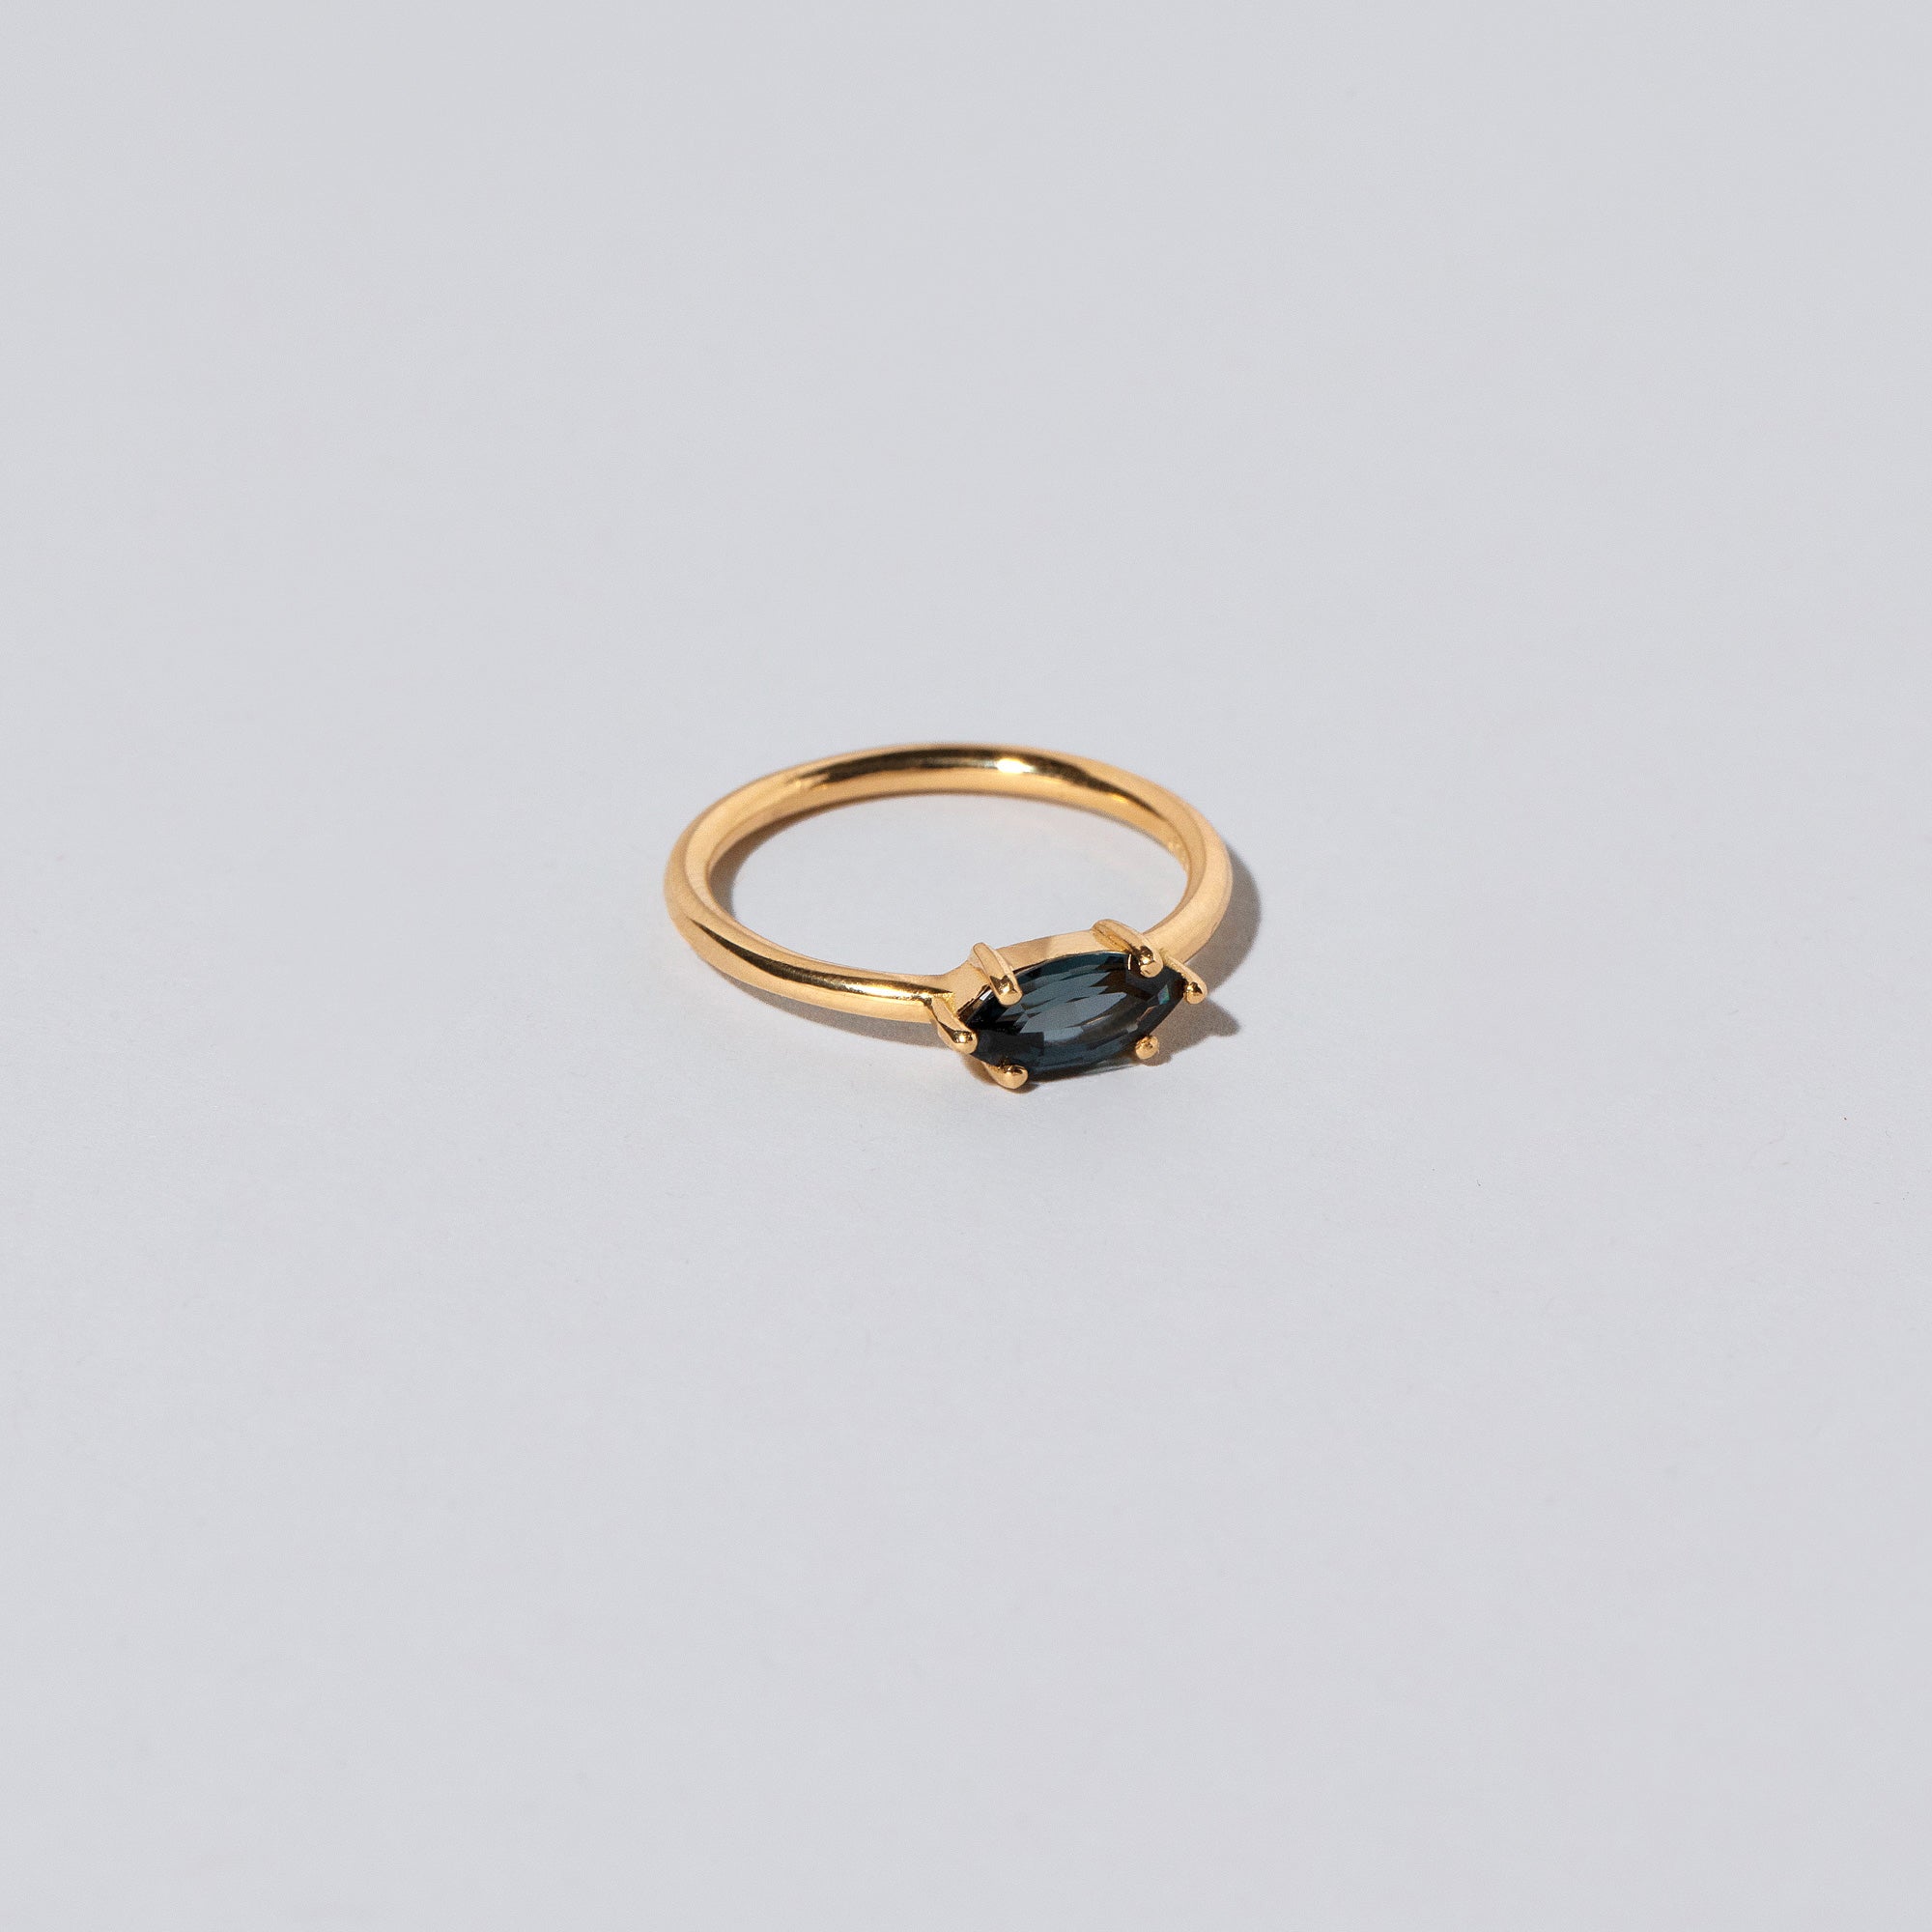 product_details::Deep Blue Ouvert Ring on light color background.